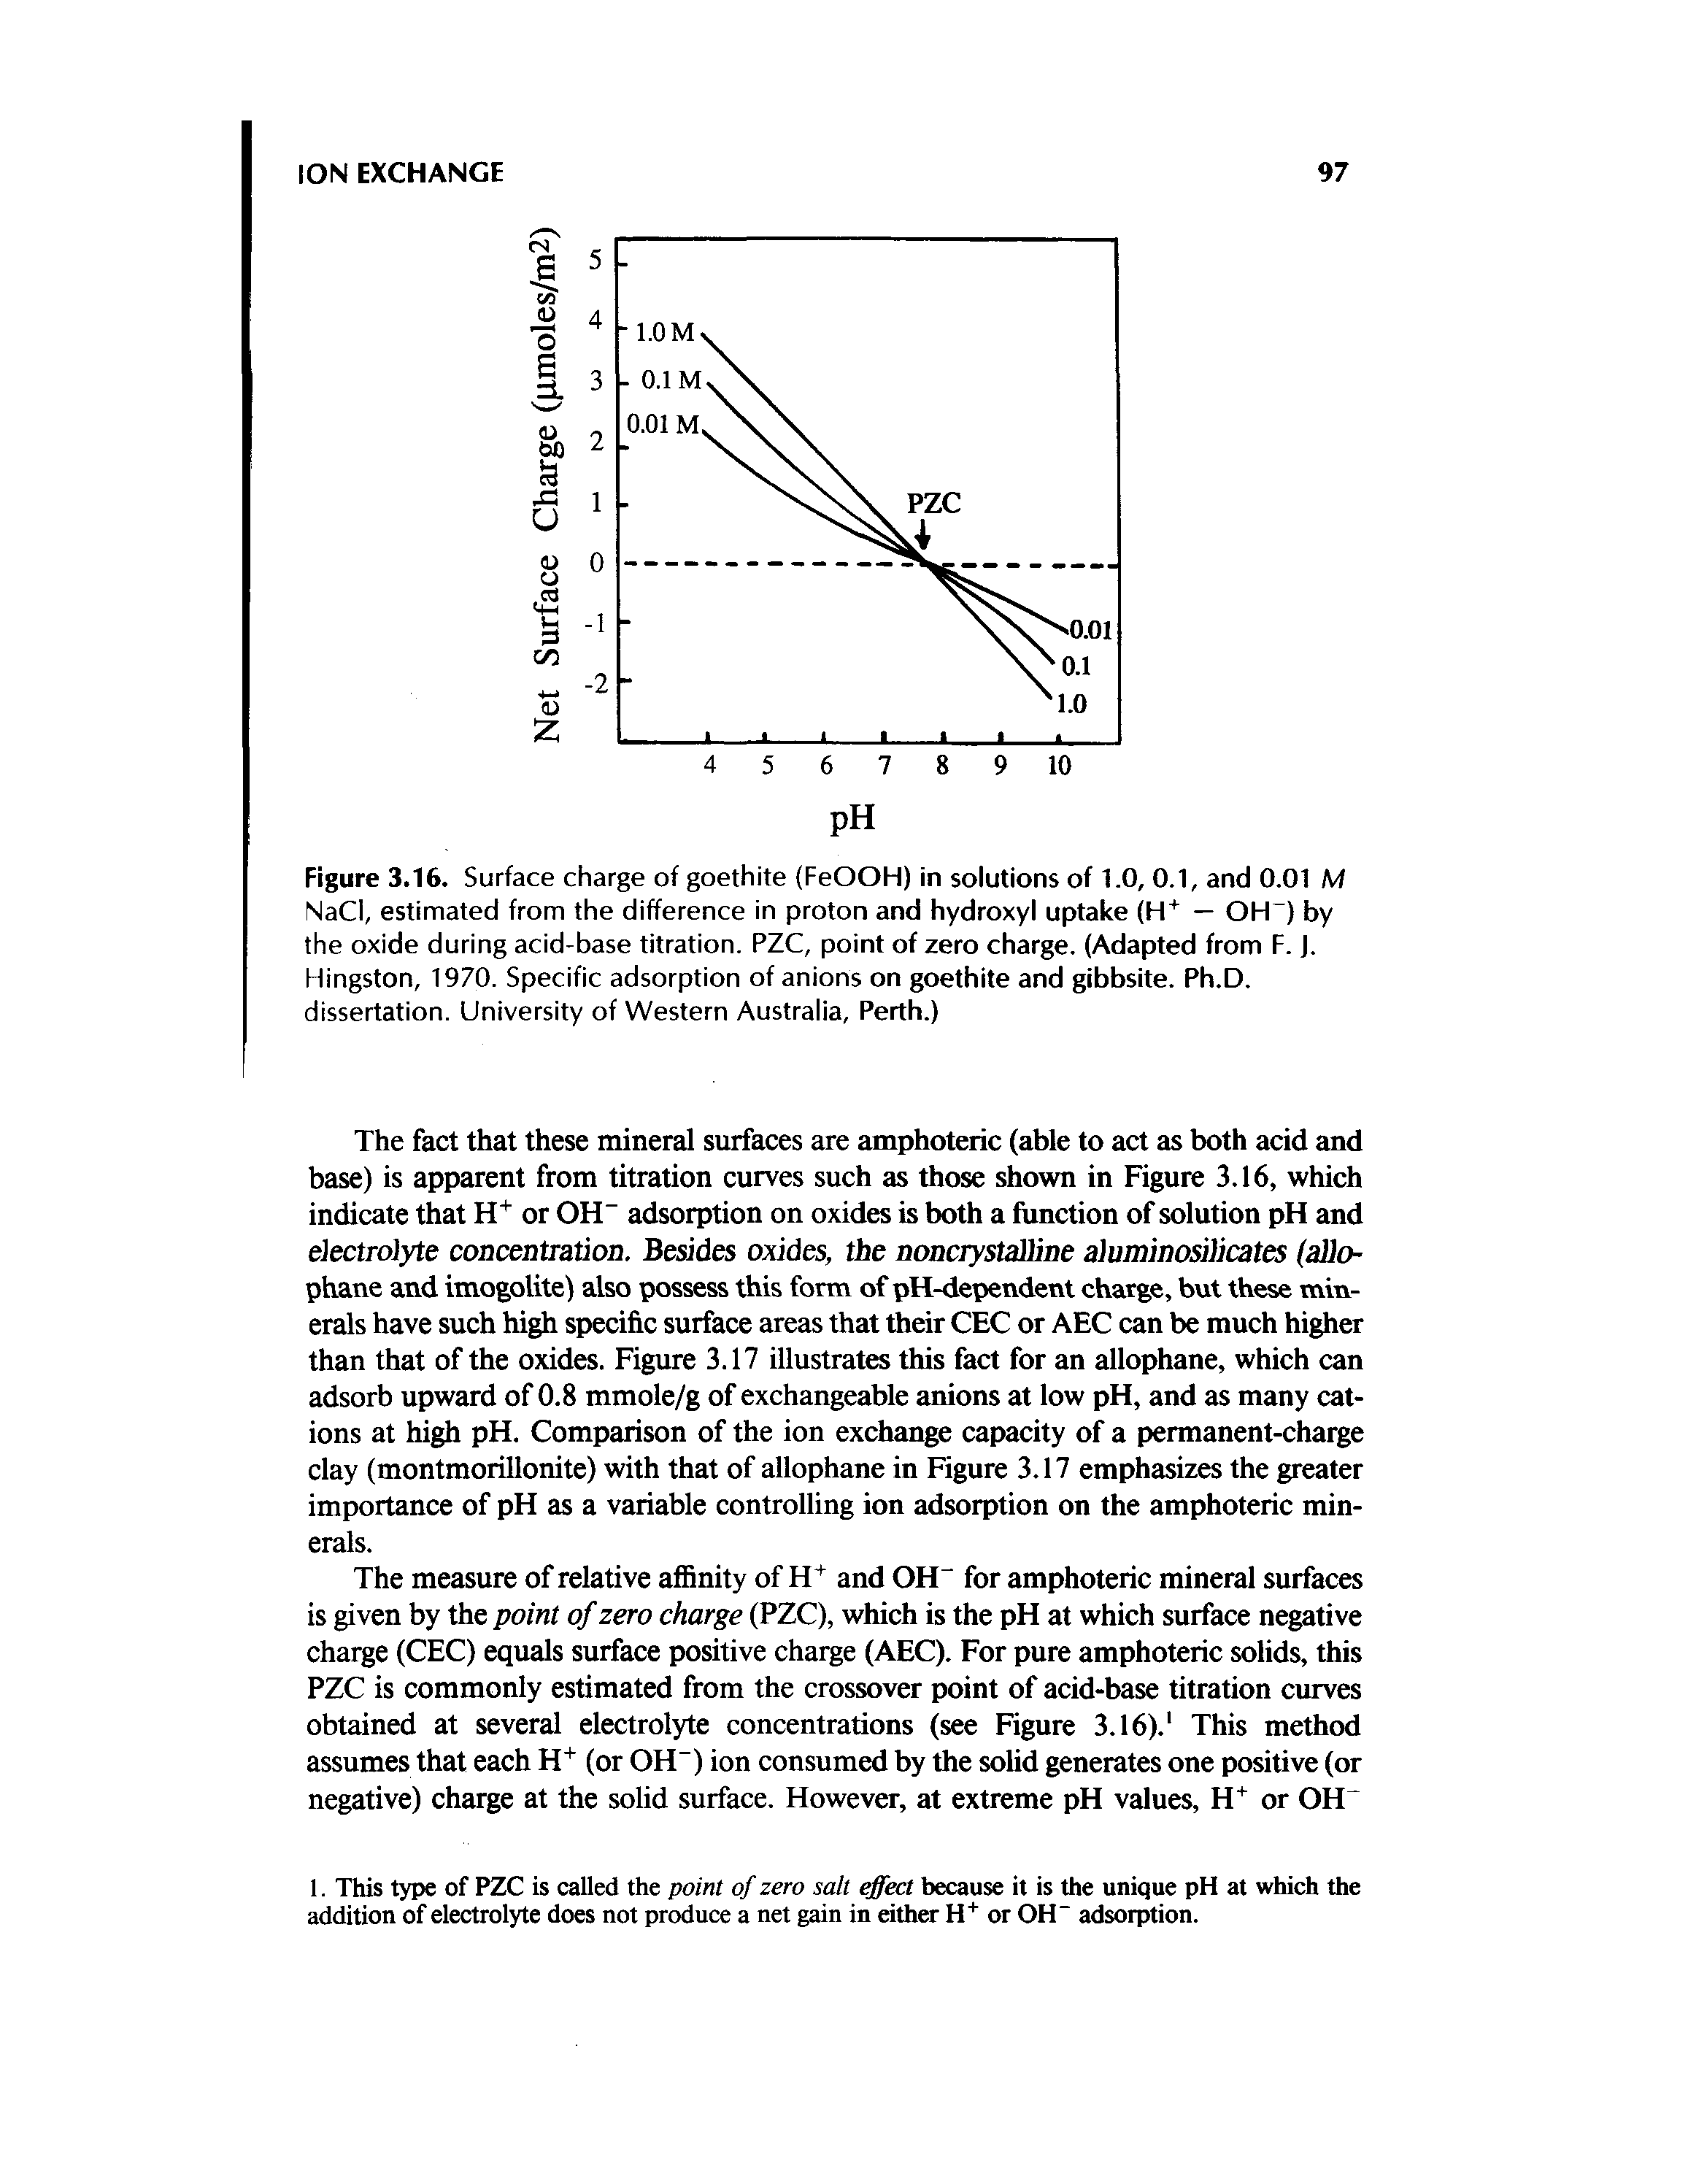 Figure 3.16. Surface charge of goethite (FeOOH) in solutions of 1.0, 0.1, and 0.01 M NaCl, estimated from the difference in proton and hydroxyl uptake (H" — OH ) by the oxide during acid-base titration. PZC, point of zero charge, (Adapted from F. J. Hingston, 1970. Specific adsorption of anions on goethite and gibbsite. Ph.D, dissertation. University of Western Australia, Perth.)...